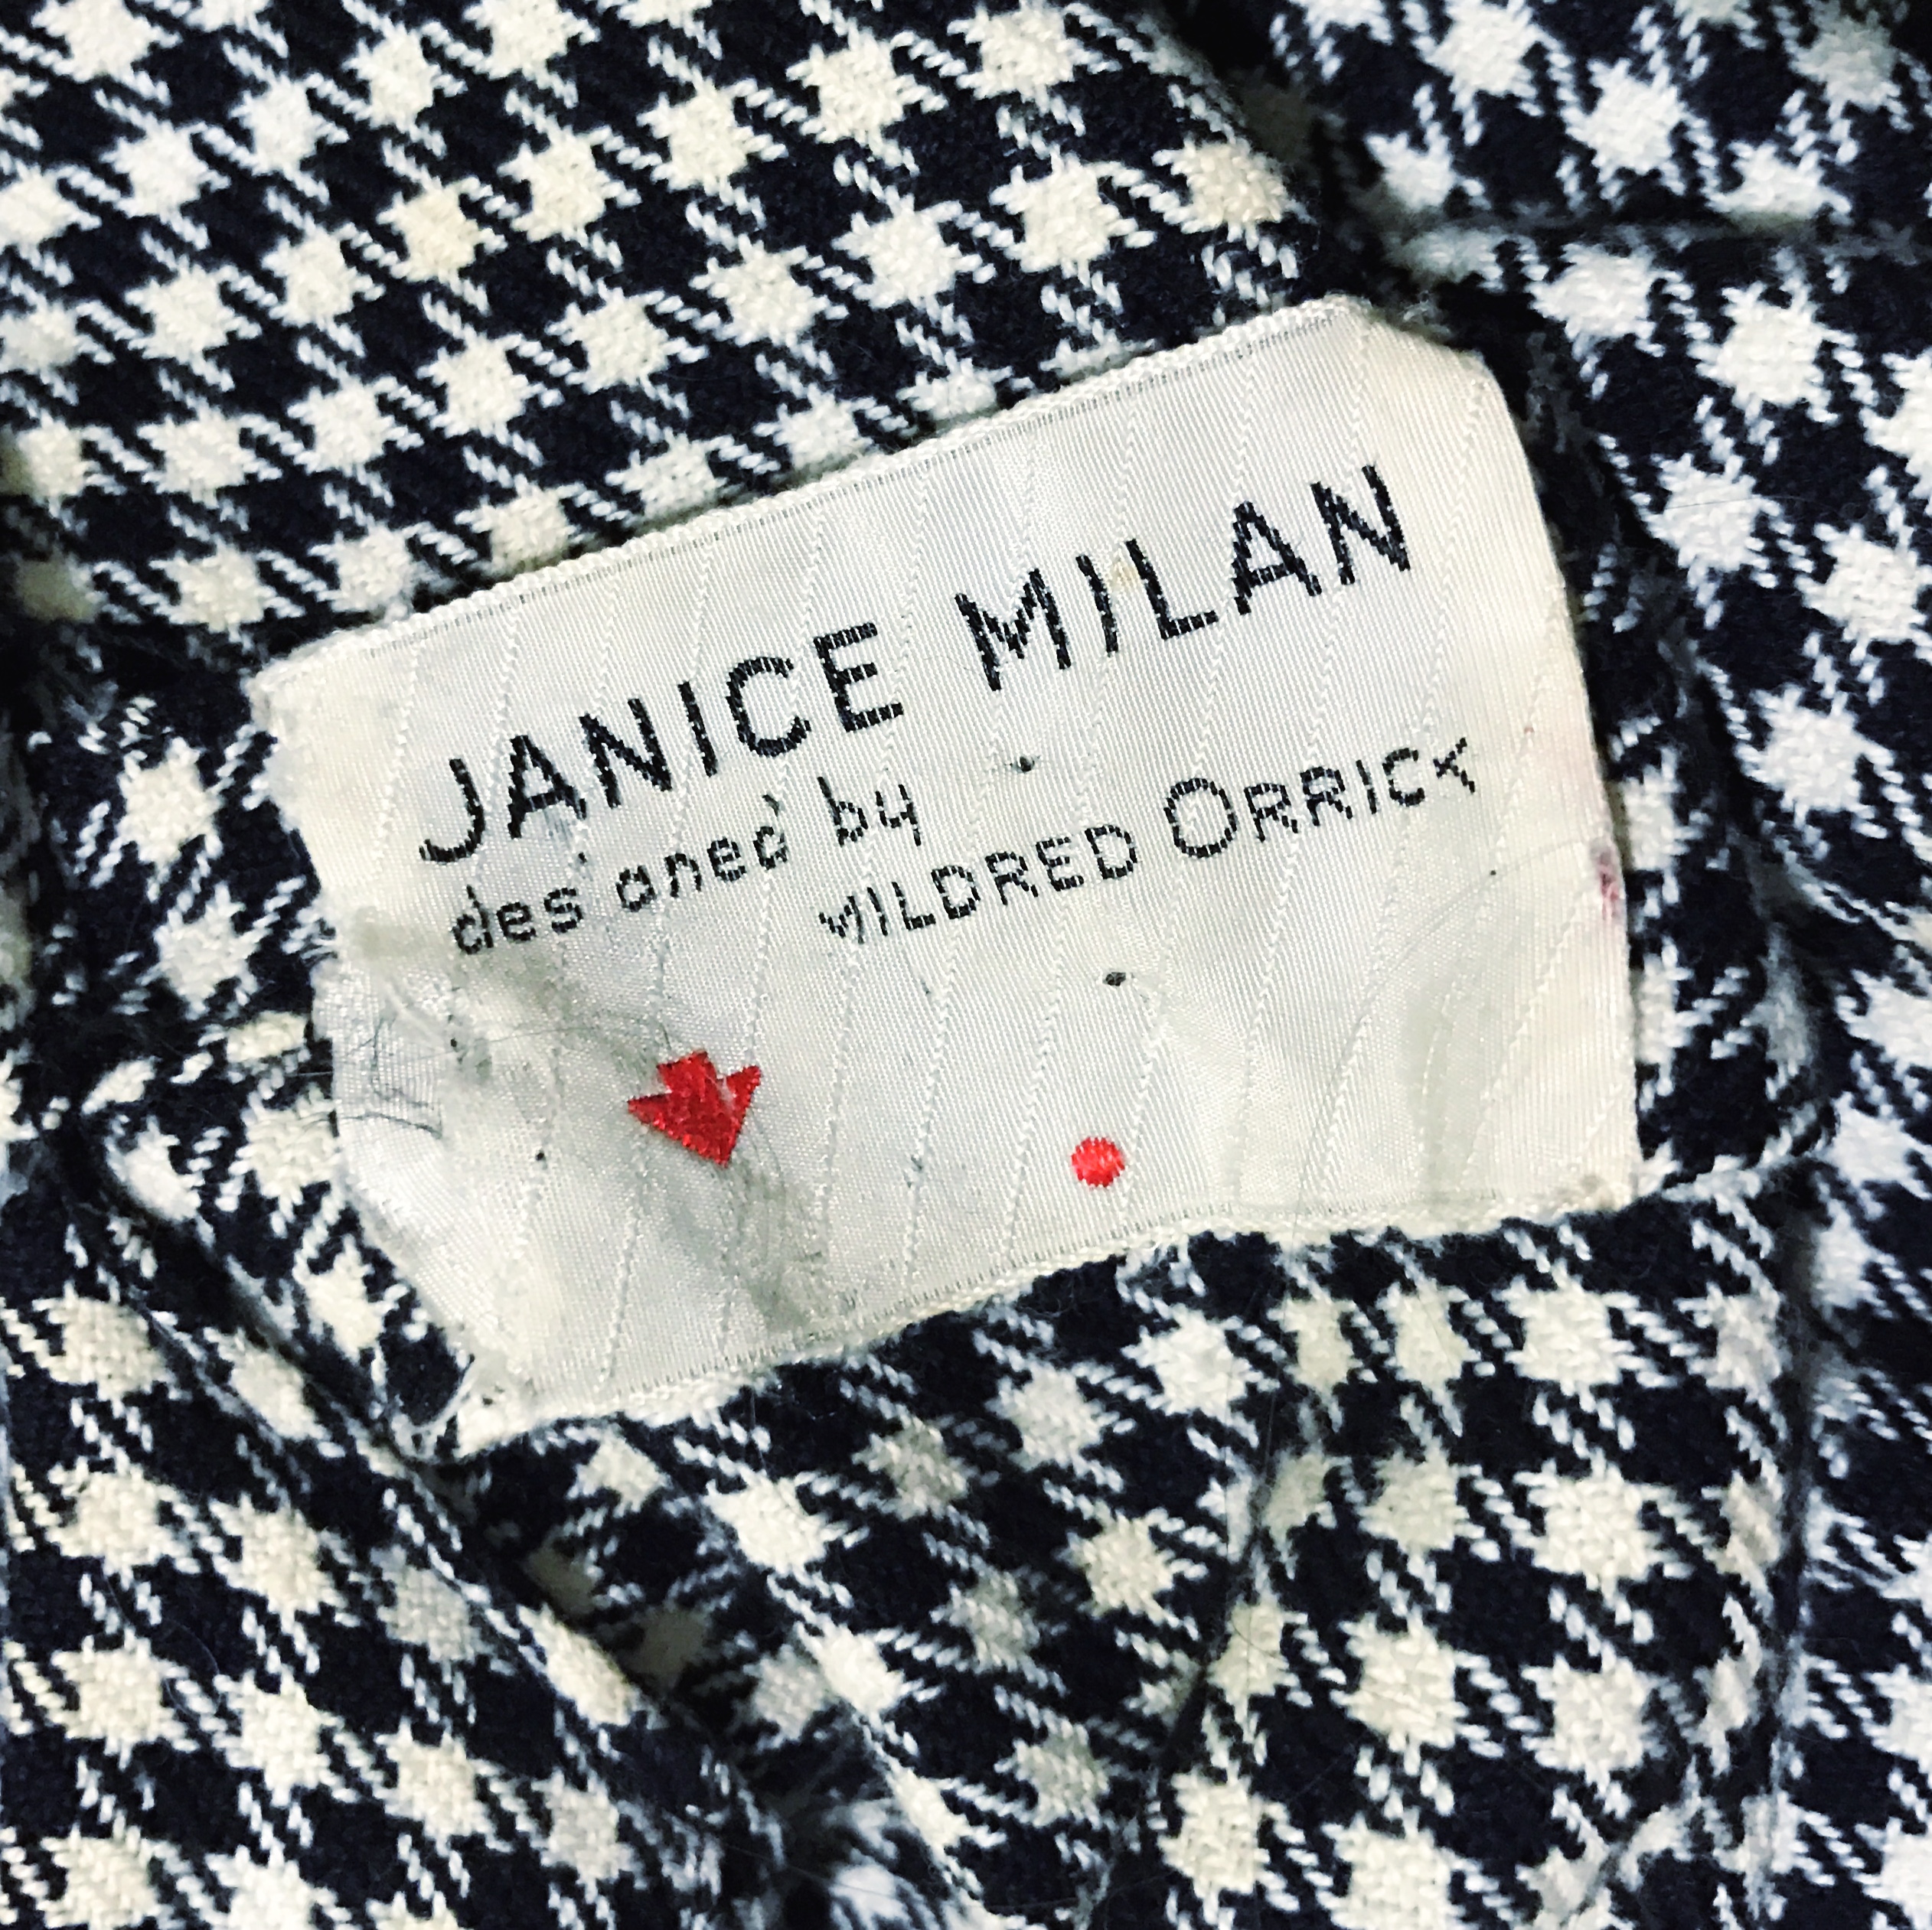 label from a Janice Milan dress by Mildred Orrick